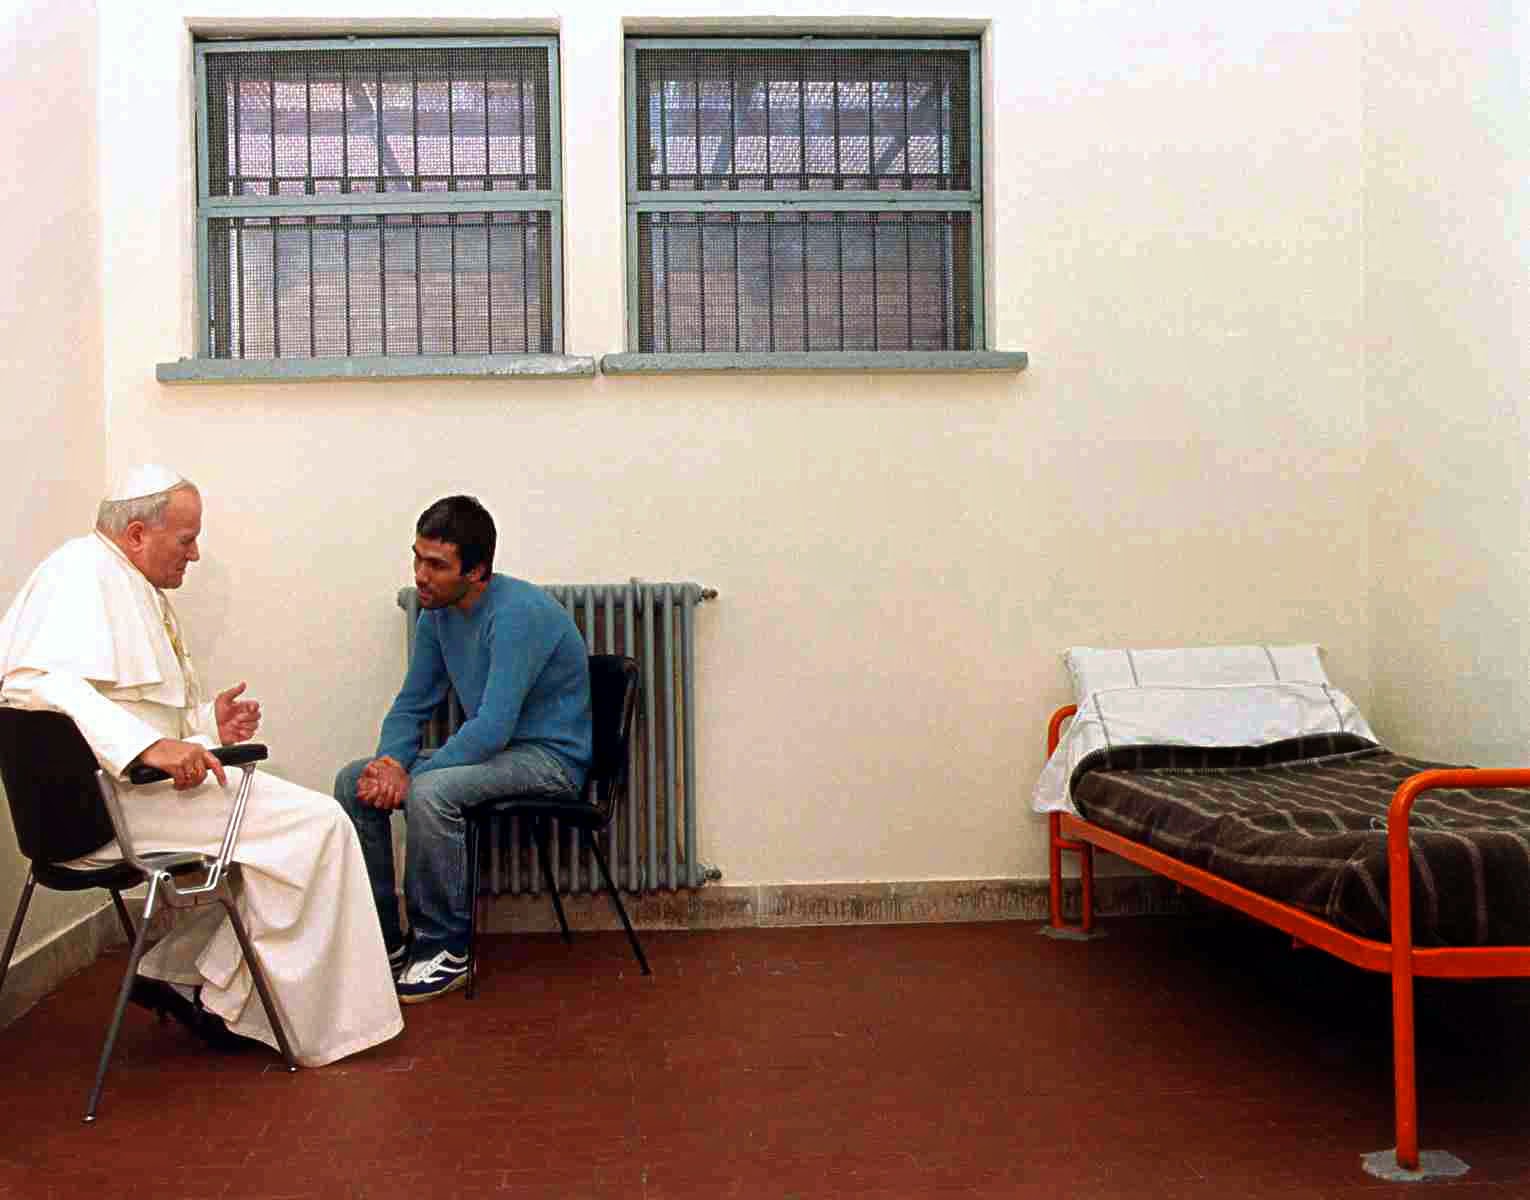 A photo of Pope John Paul II in a cell with his assassin, Mehmet Ali Agca